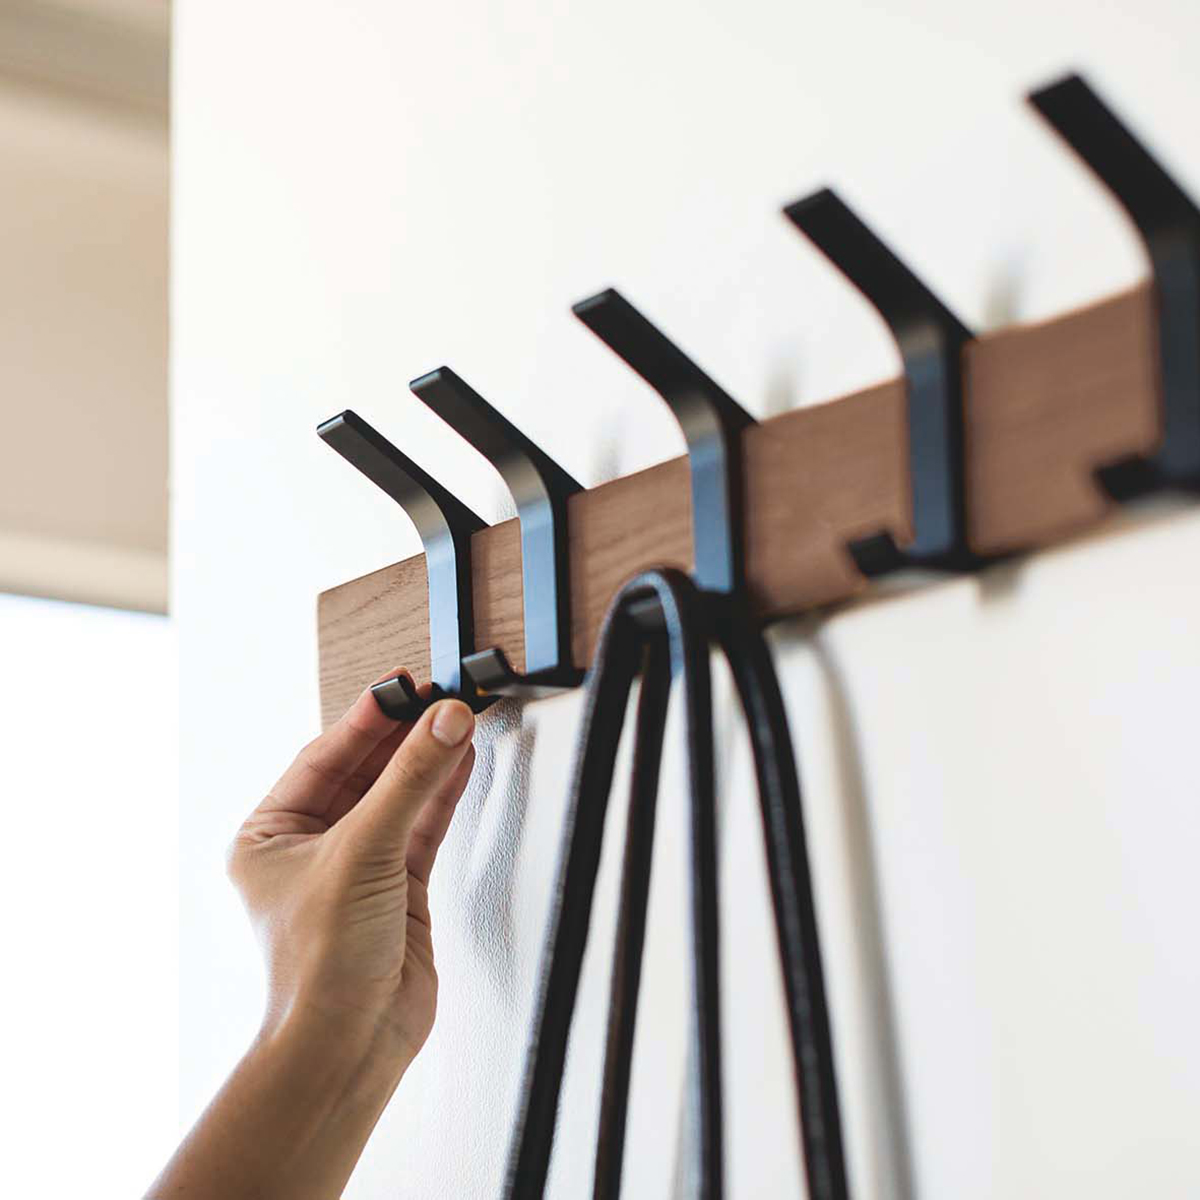 Yamazaki Rin Wall-Mounted Coat Hook | The Container Store